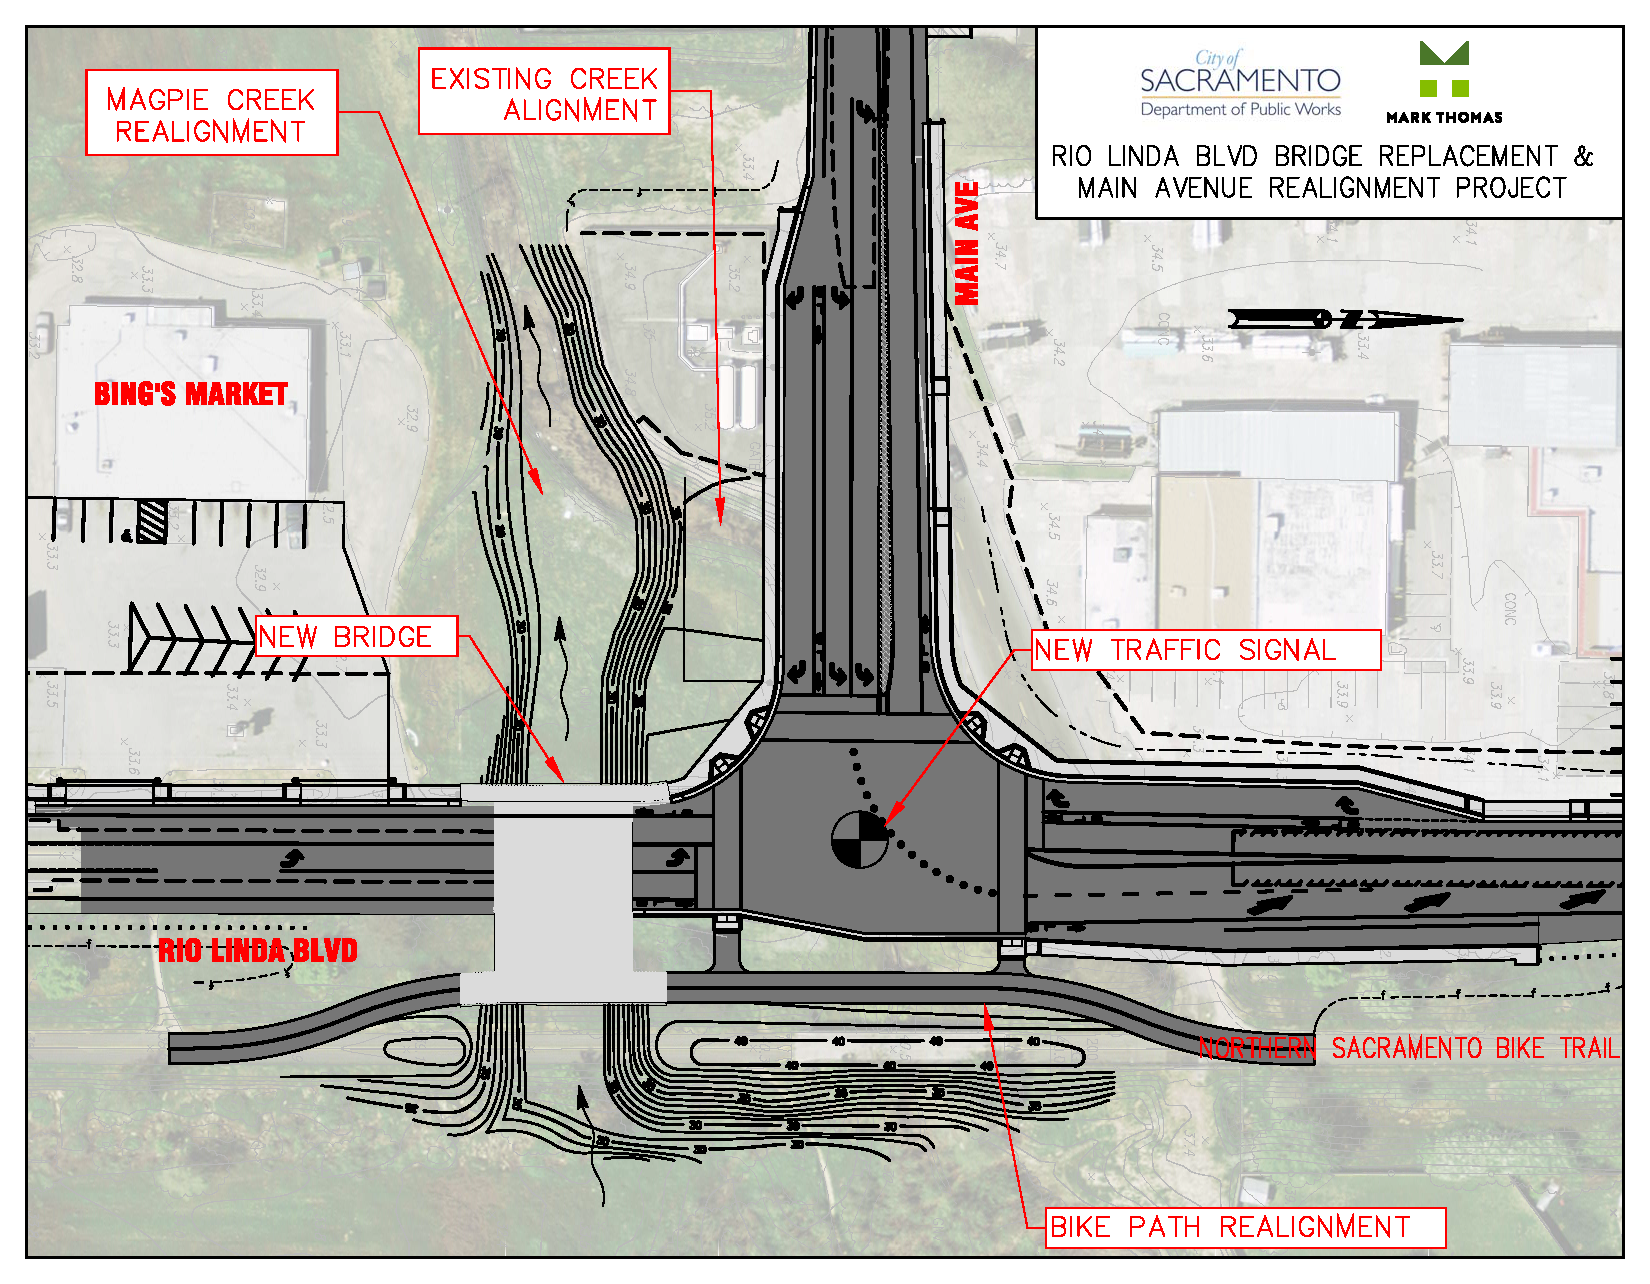 Diagram of proposed intersection and bridge improvements